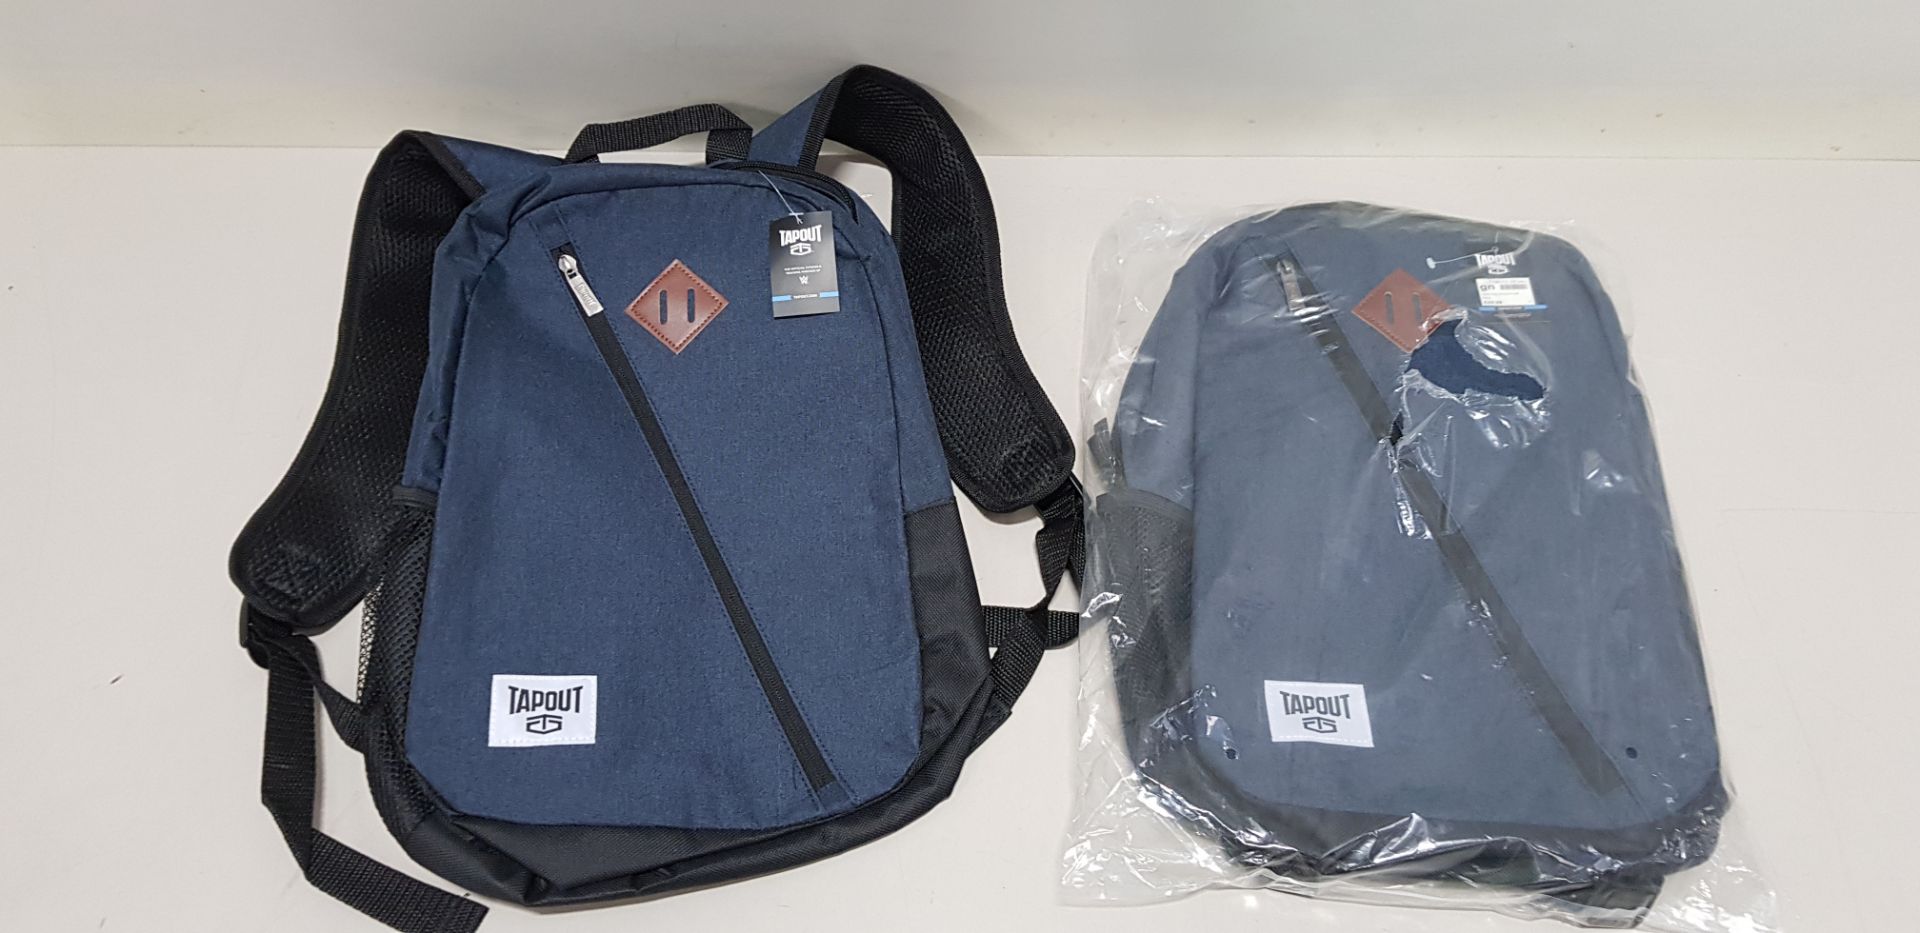 12 X BRAND NEW TAPOUT NAVY BACKPACKS RRP £29.99 (TOTAL RRP £359.88)